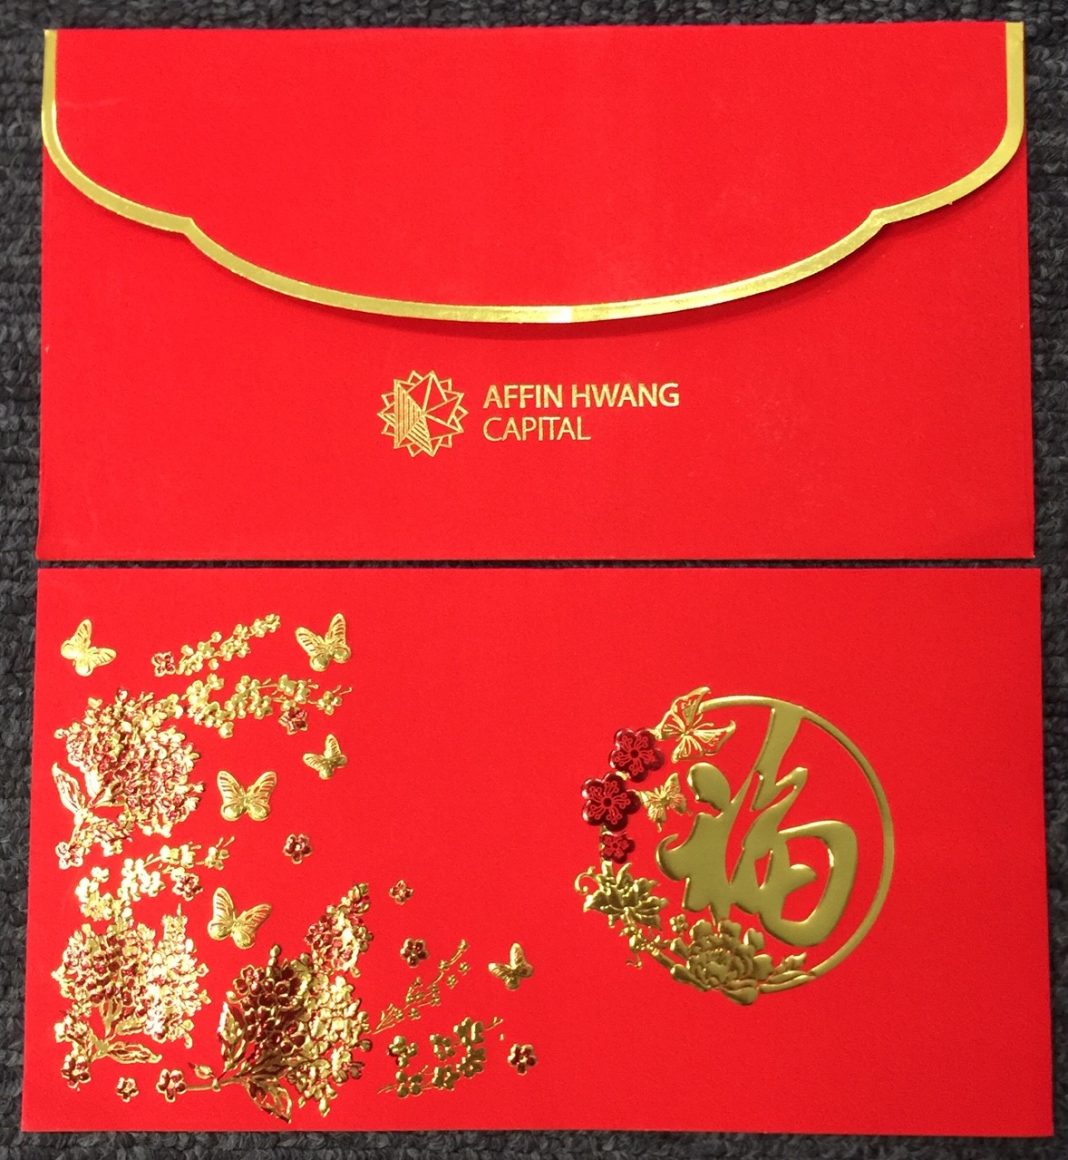 2019 Best Ang Pao Designs by Banks in Malaysia